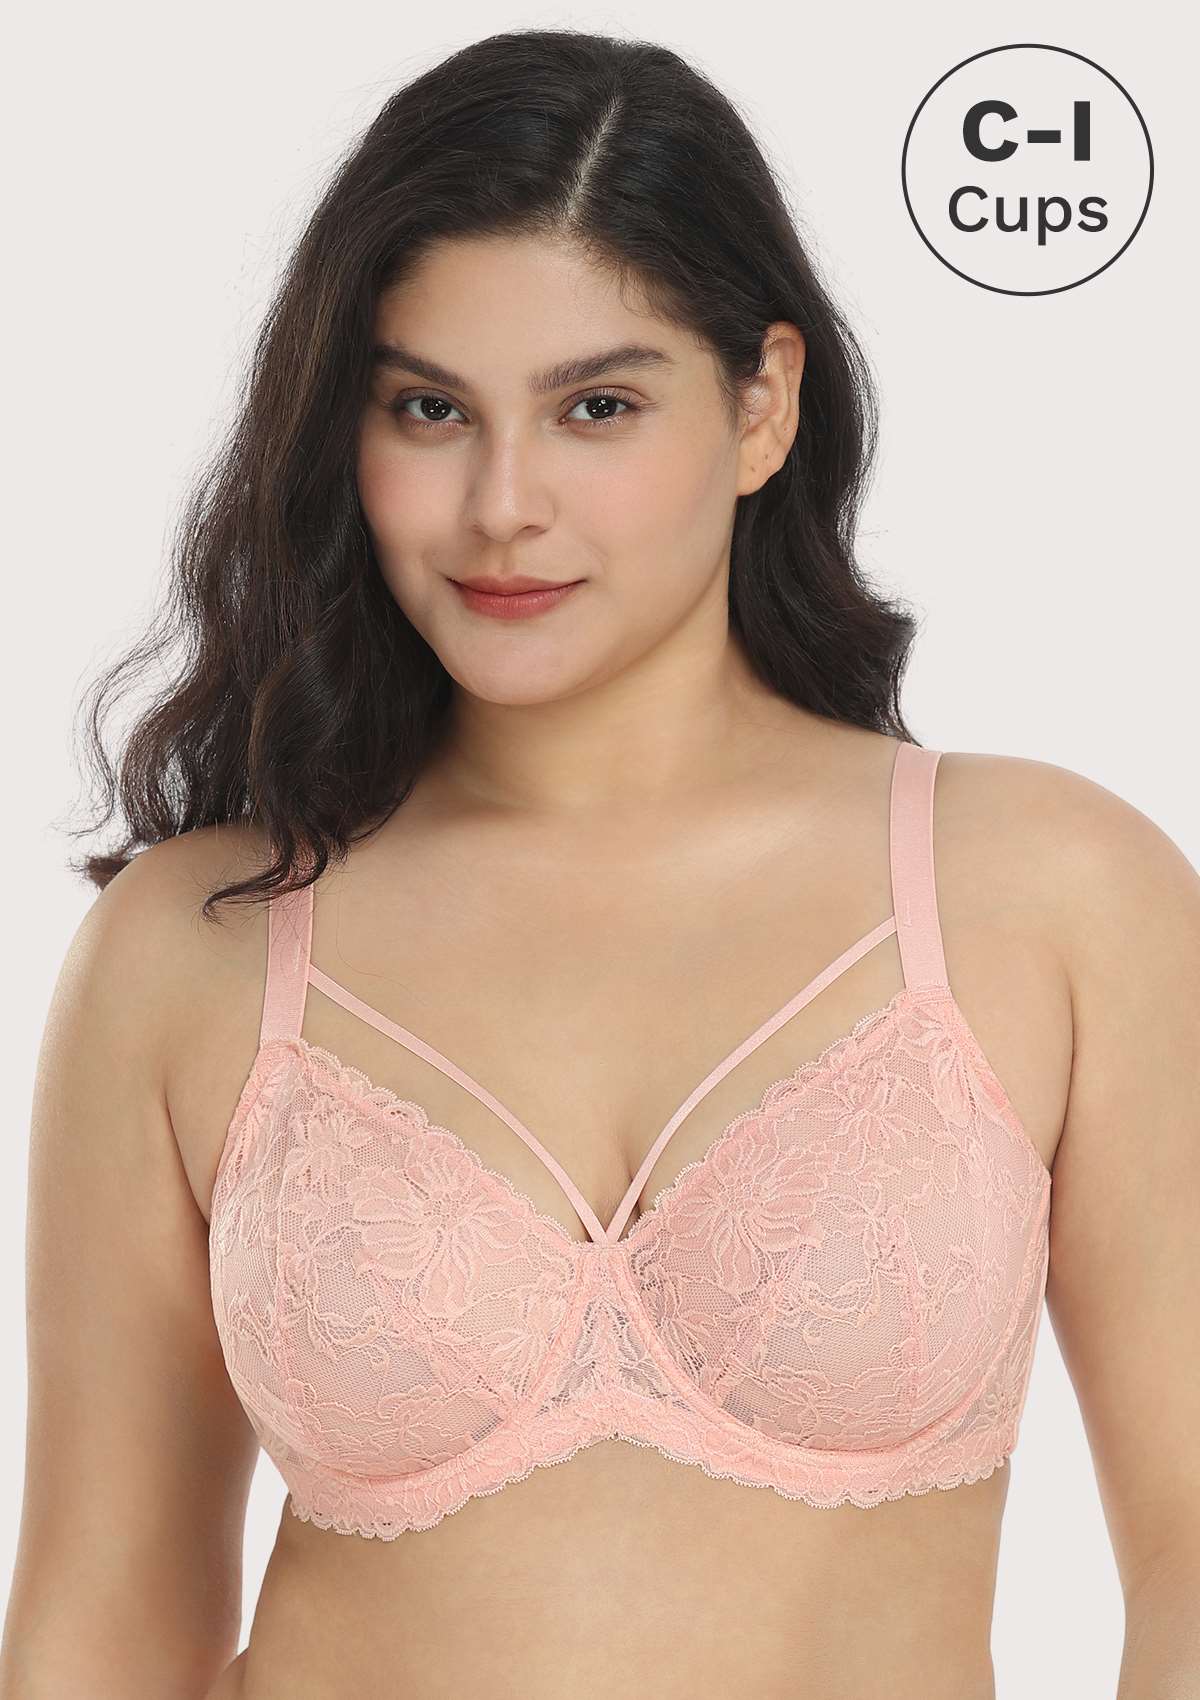 HSIA Pretty In Petals: Strappy Lace Sheer Bra For Side And Back Fat - Beige Cream / 38 / C